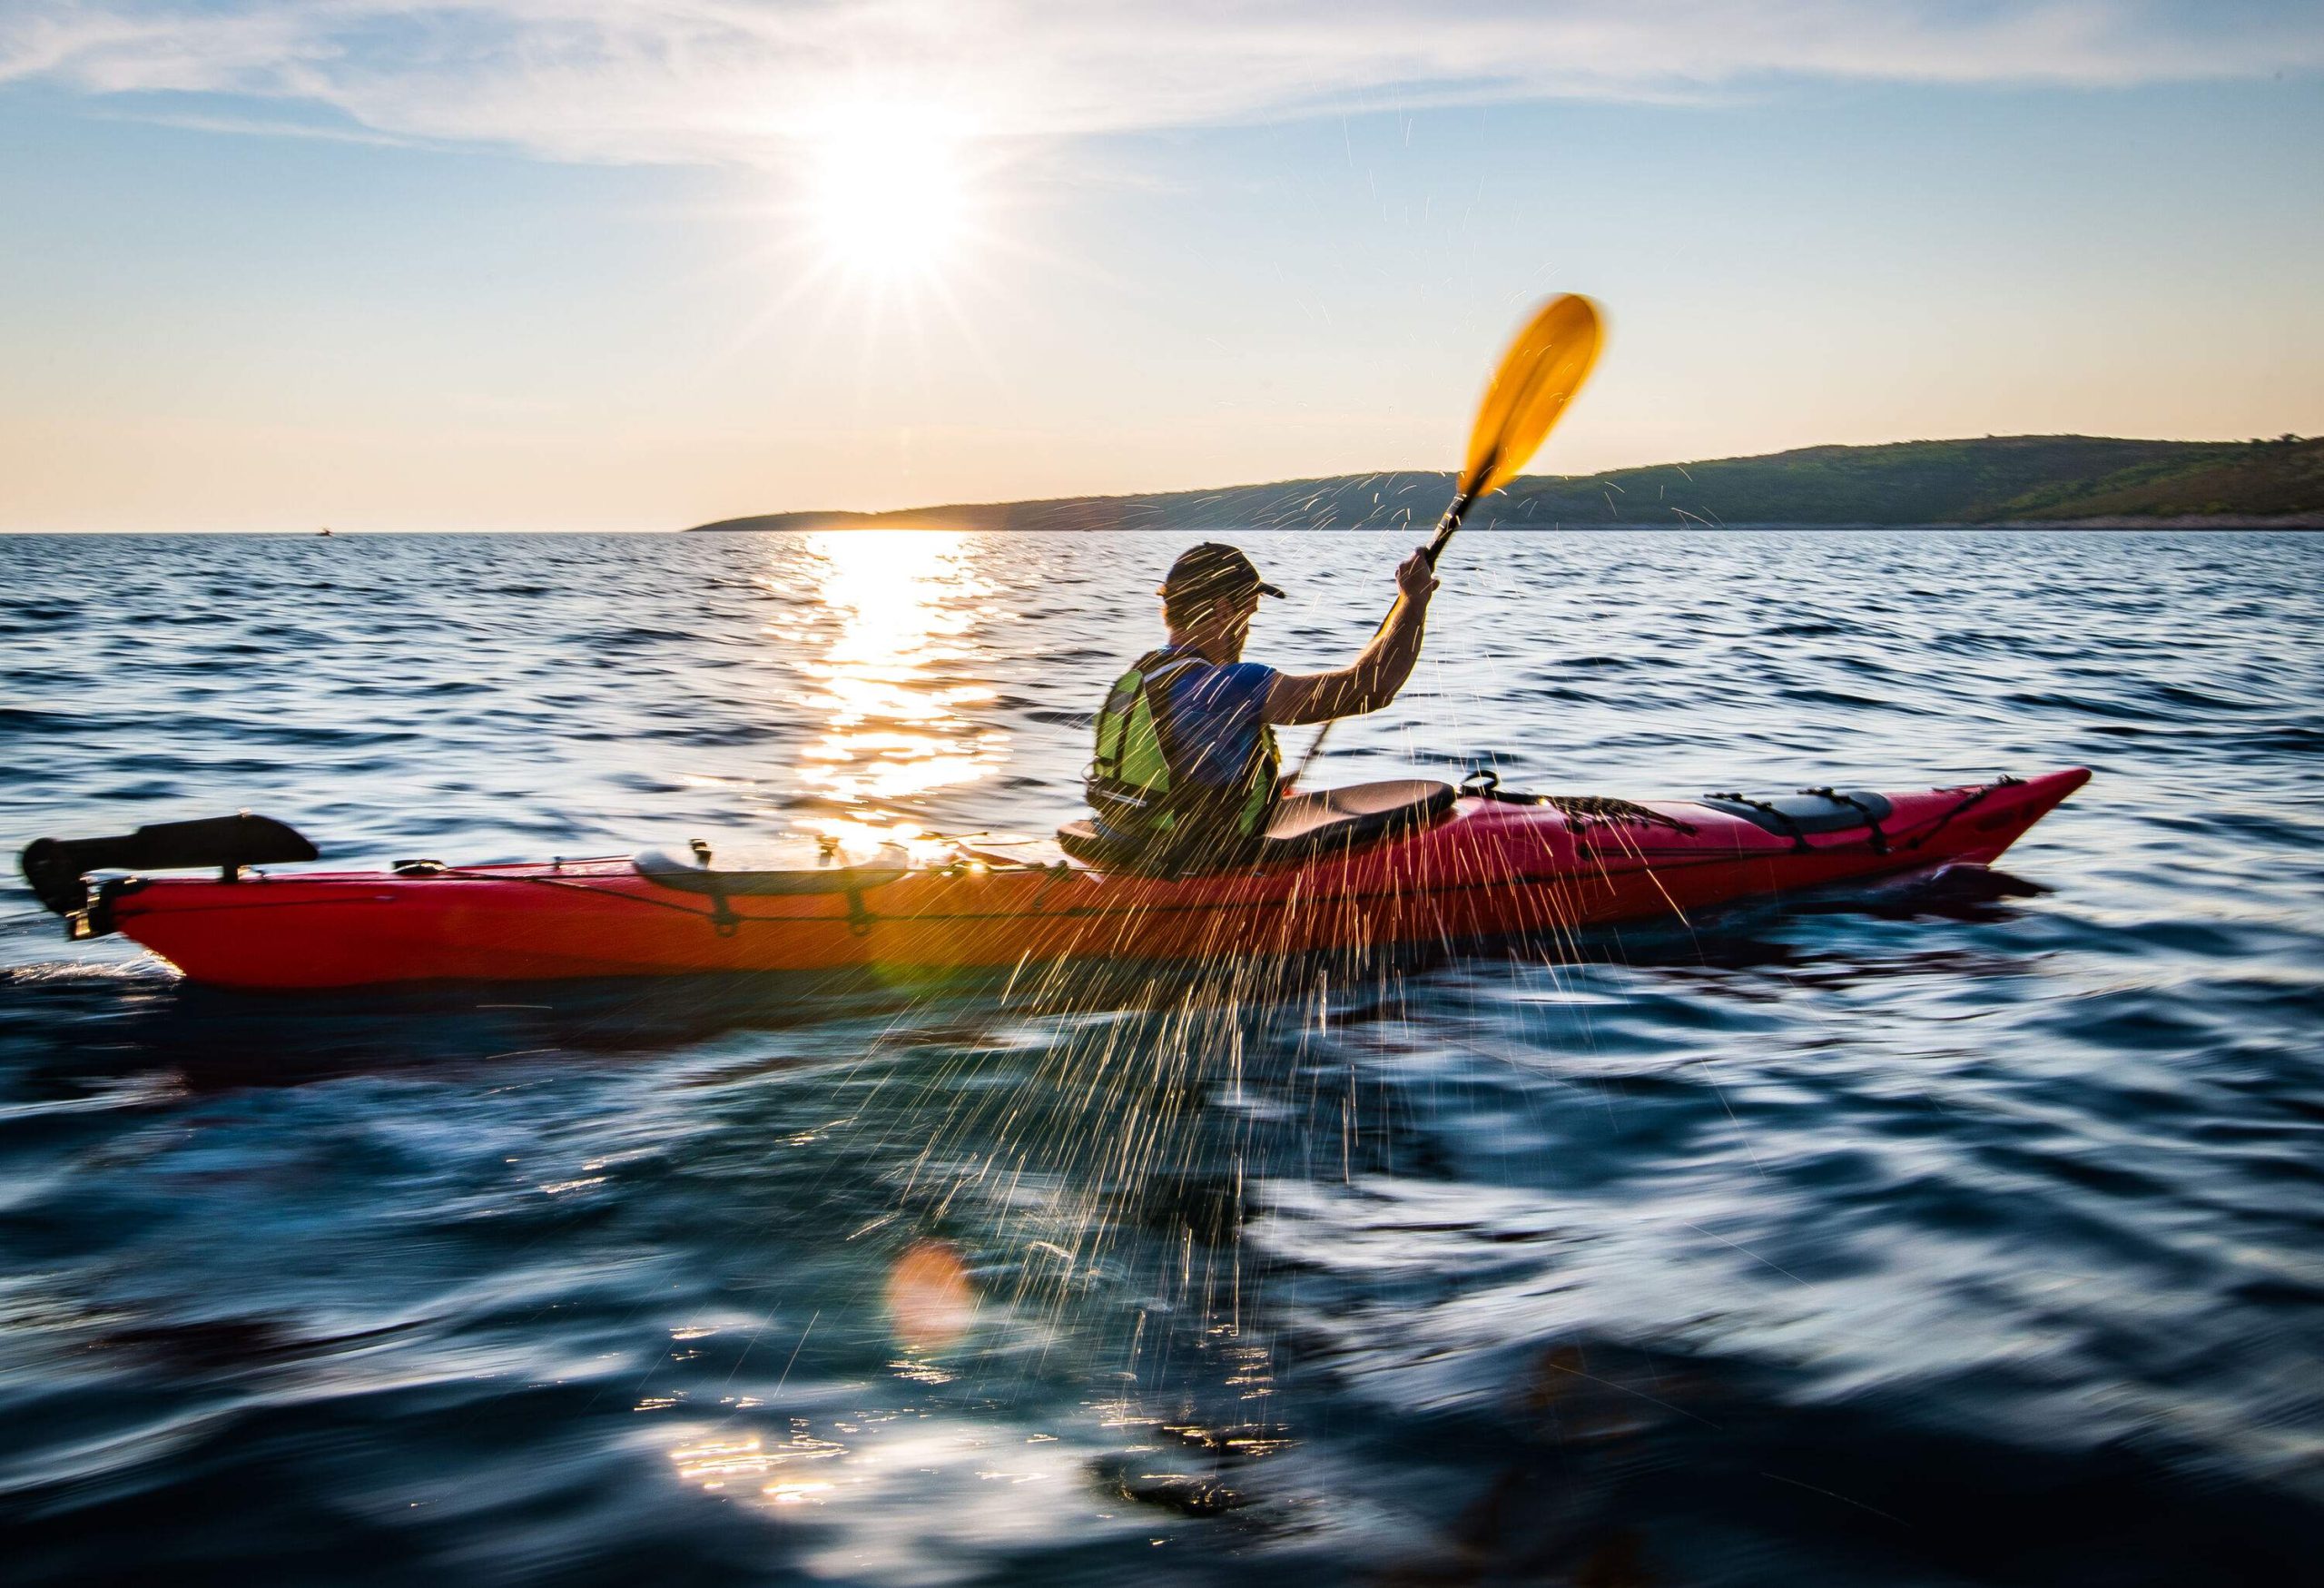 A kayaker paddles across a big ocean as the sun glistens on the waters.